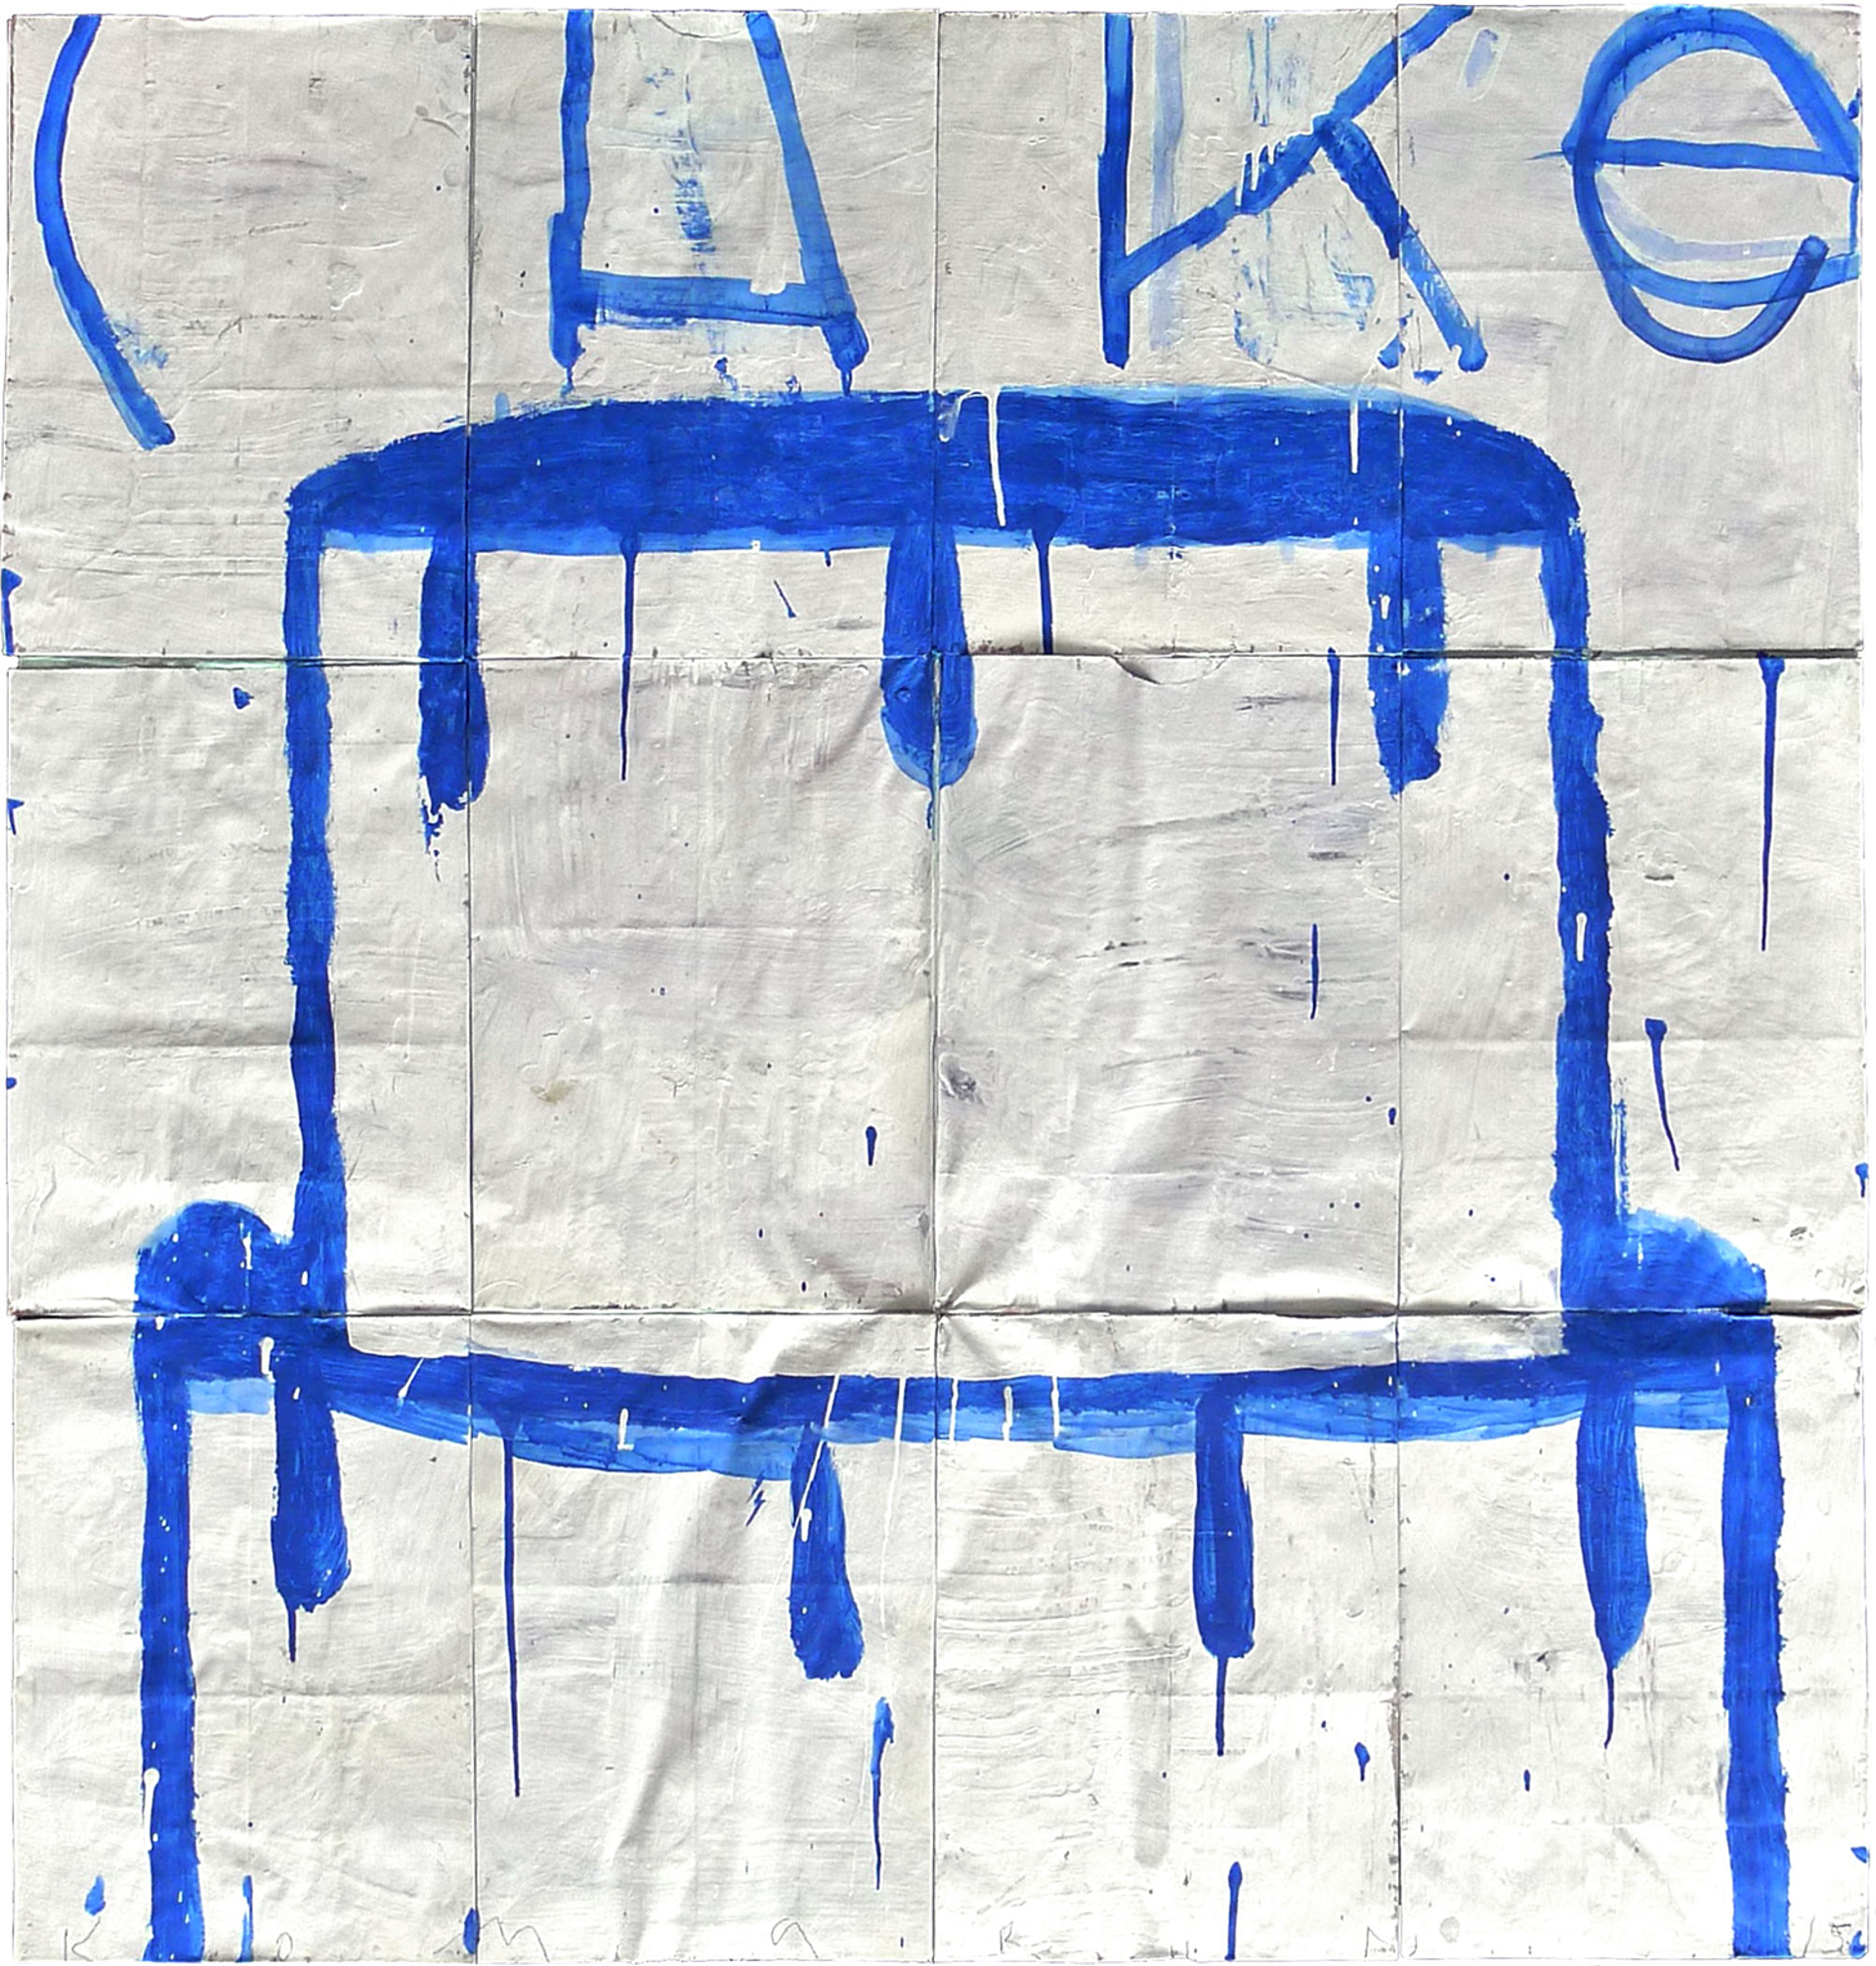 Cake, Double Stack (Blue on White) by Gary Komarin